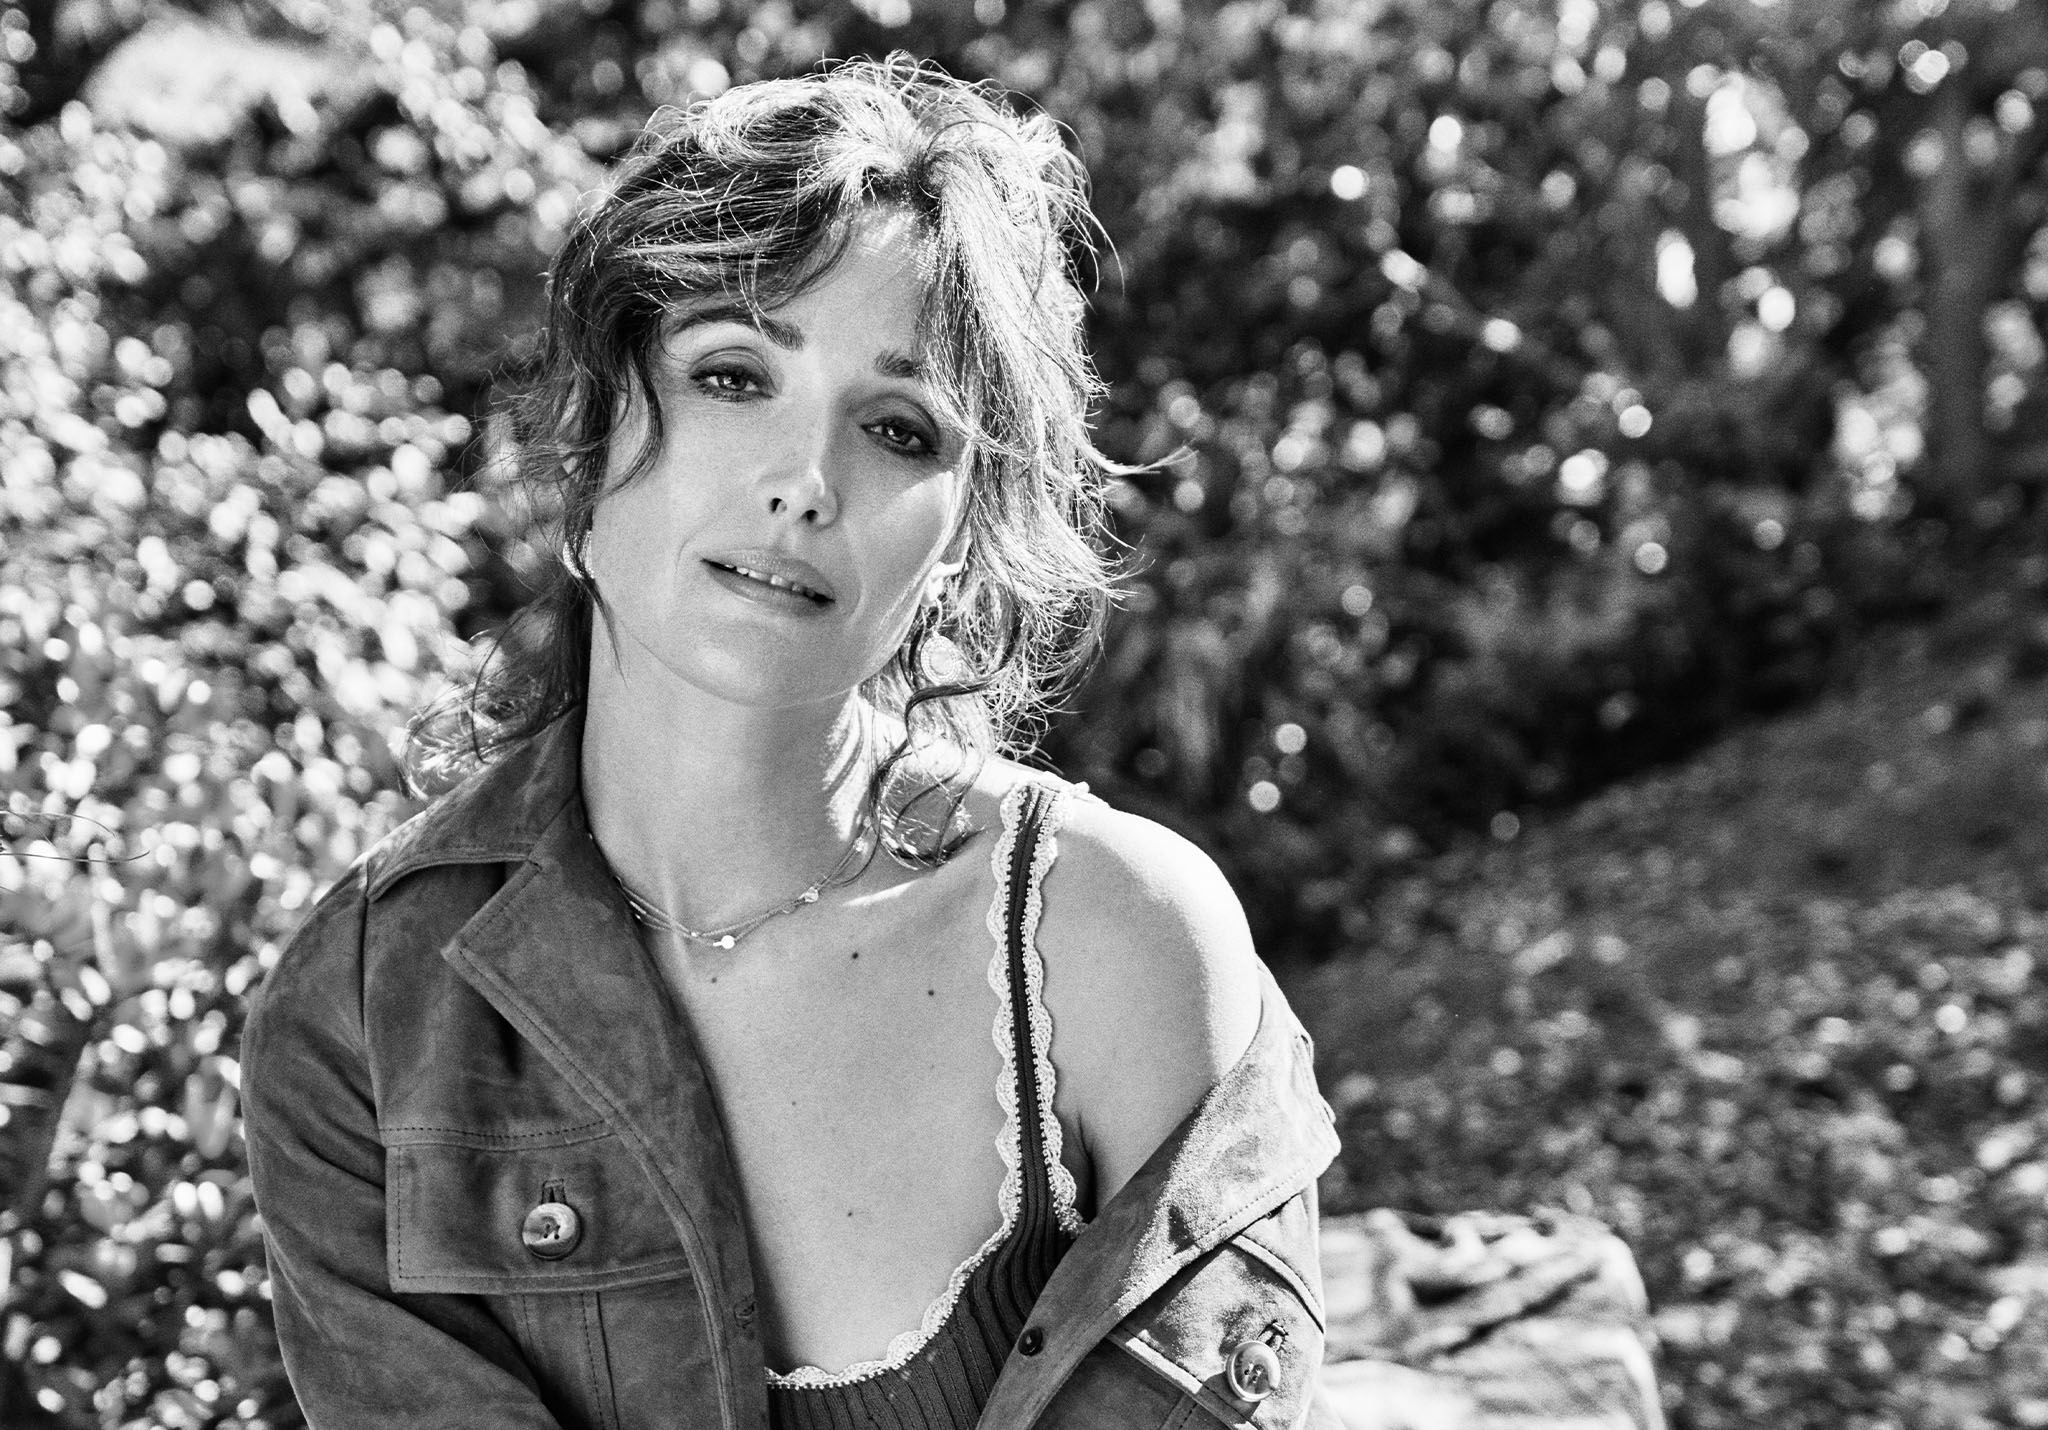 Rose Byrne's Perfectly Sculpted Body on Full Display in Nude Images